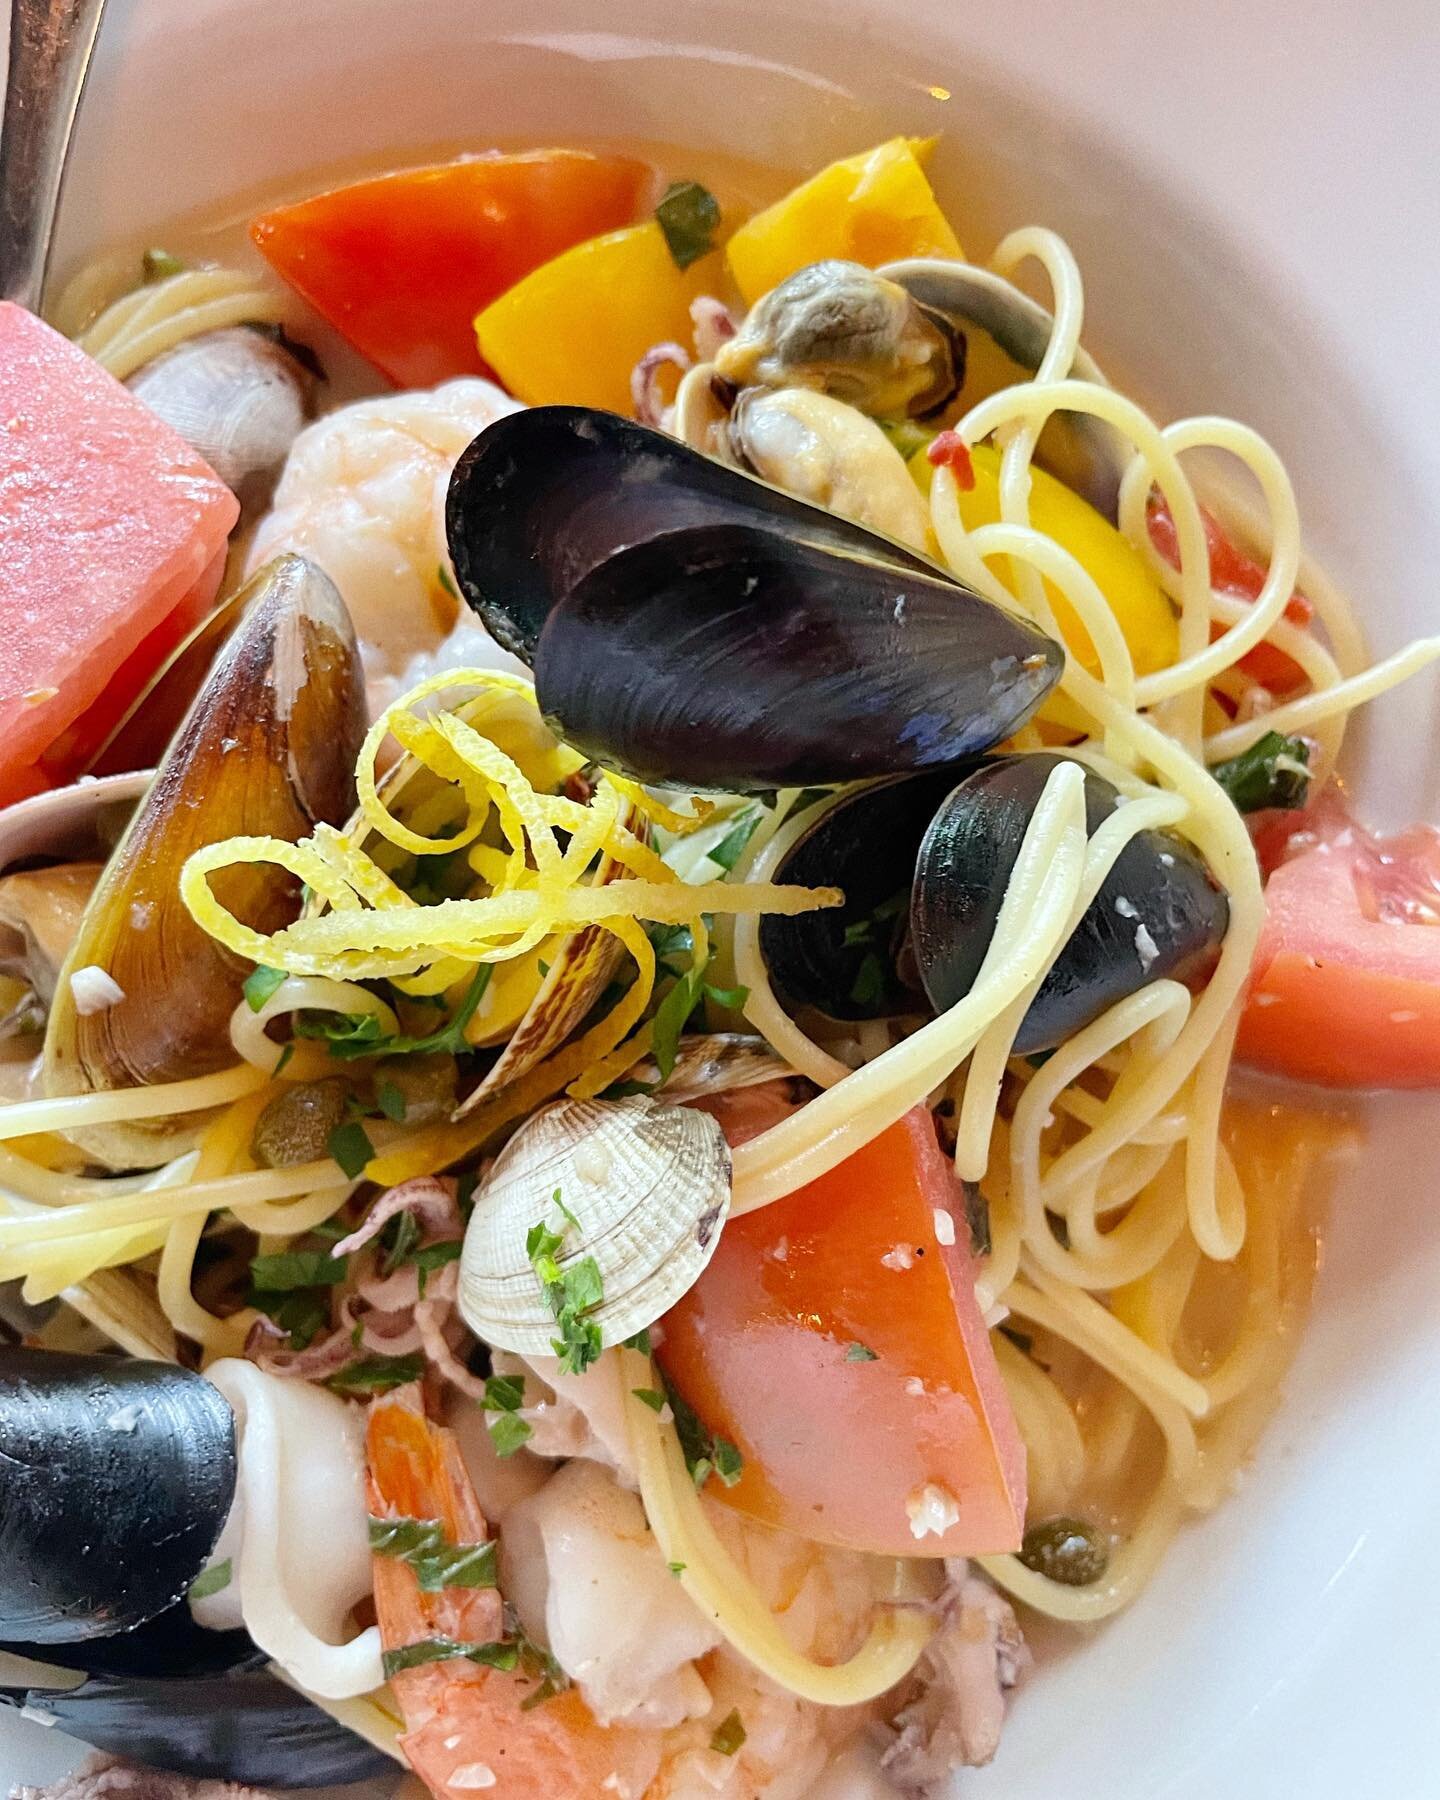 With summer in full swing, we&rsquo;re in the mood for some bright and fresh flavors and lots of seafood 🦪🦐 @grappaseattle came through with their Spaghetti Seafood Vongole 🤤 What&rsquo;re your summertime favorites we should check out?